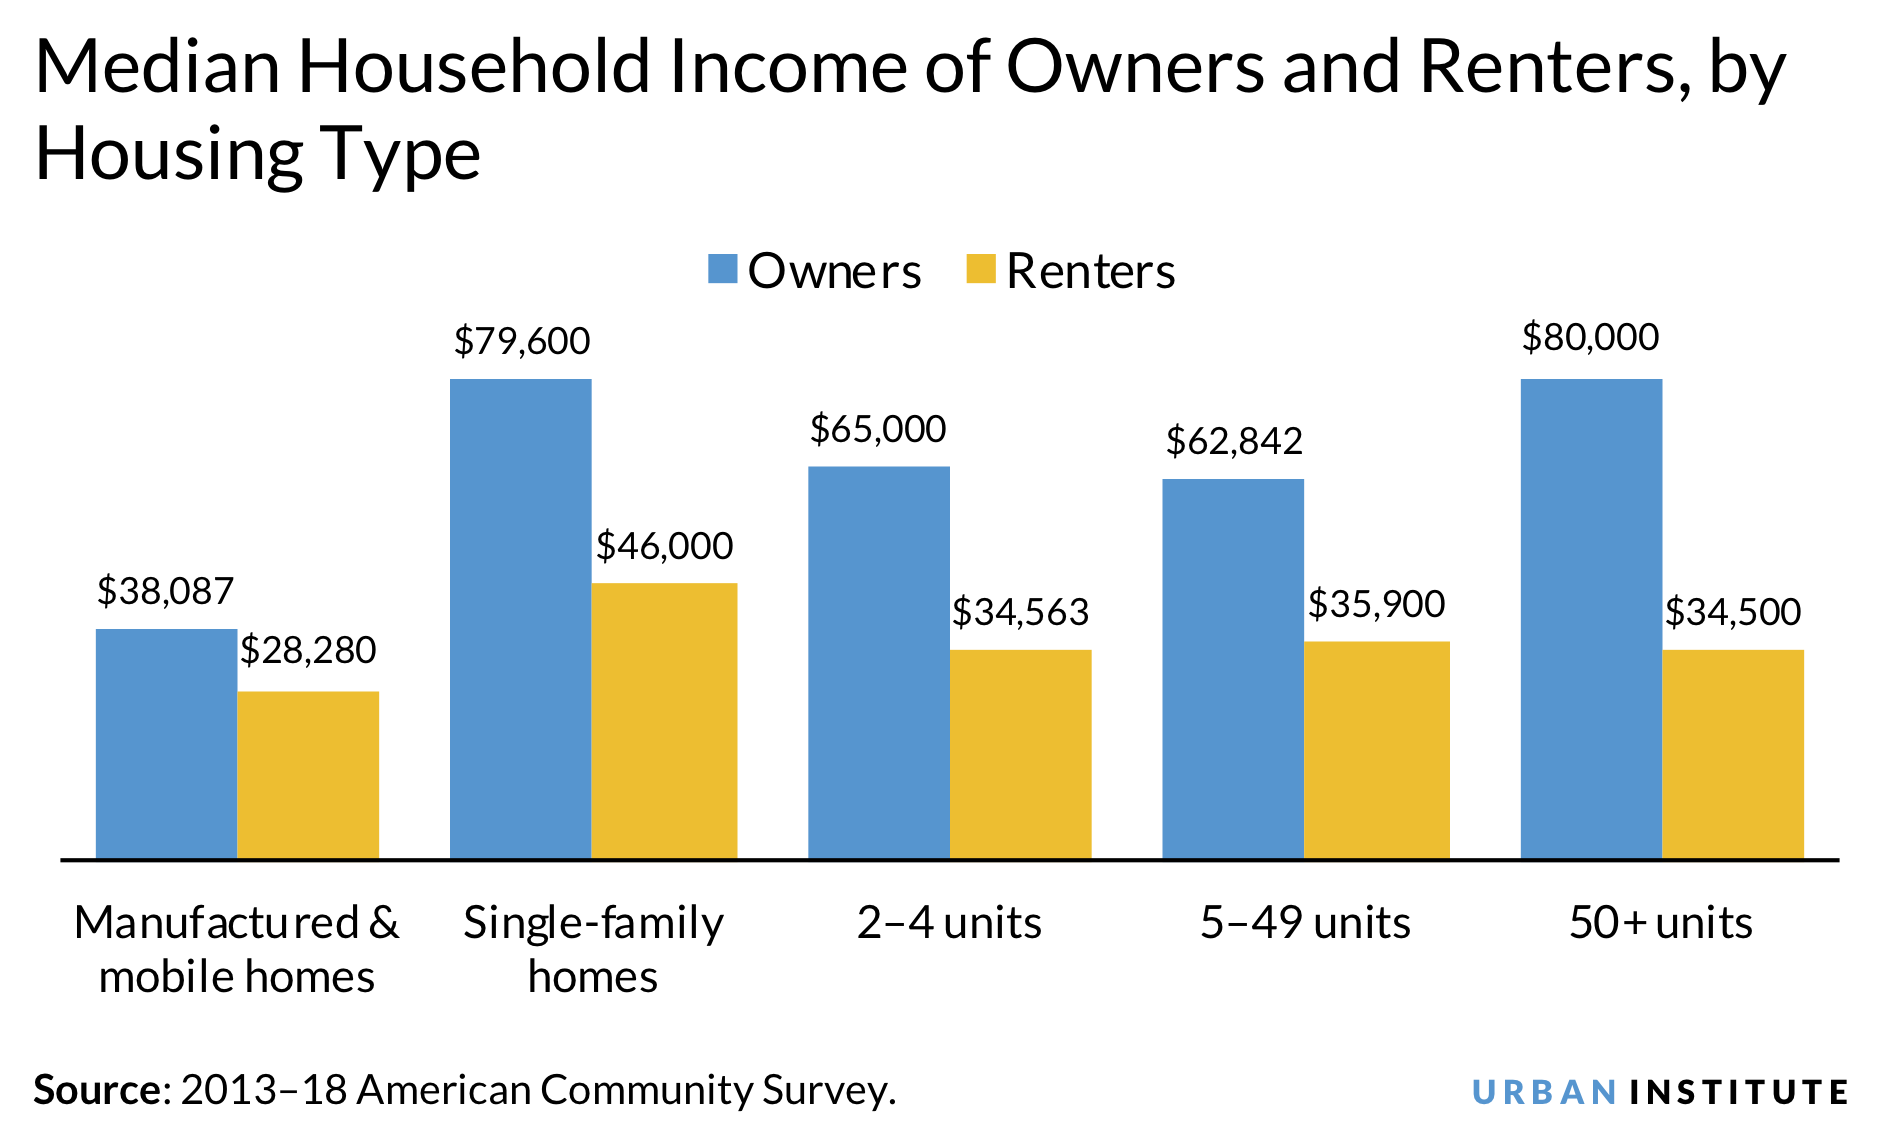 Median income of homeowners and renters by housing type